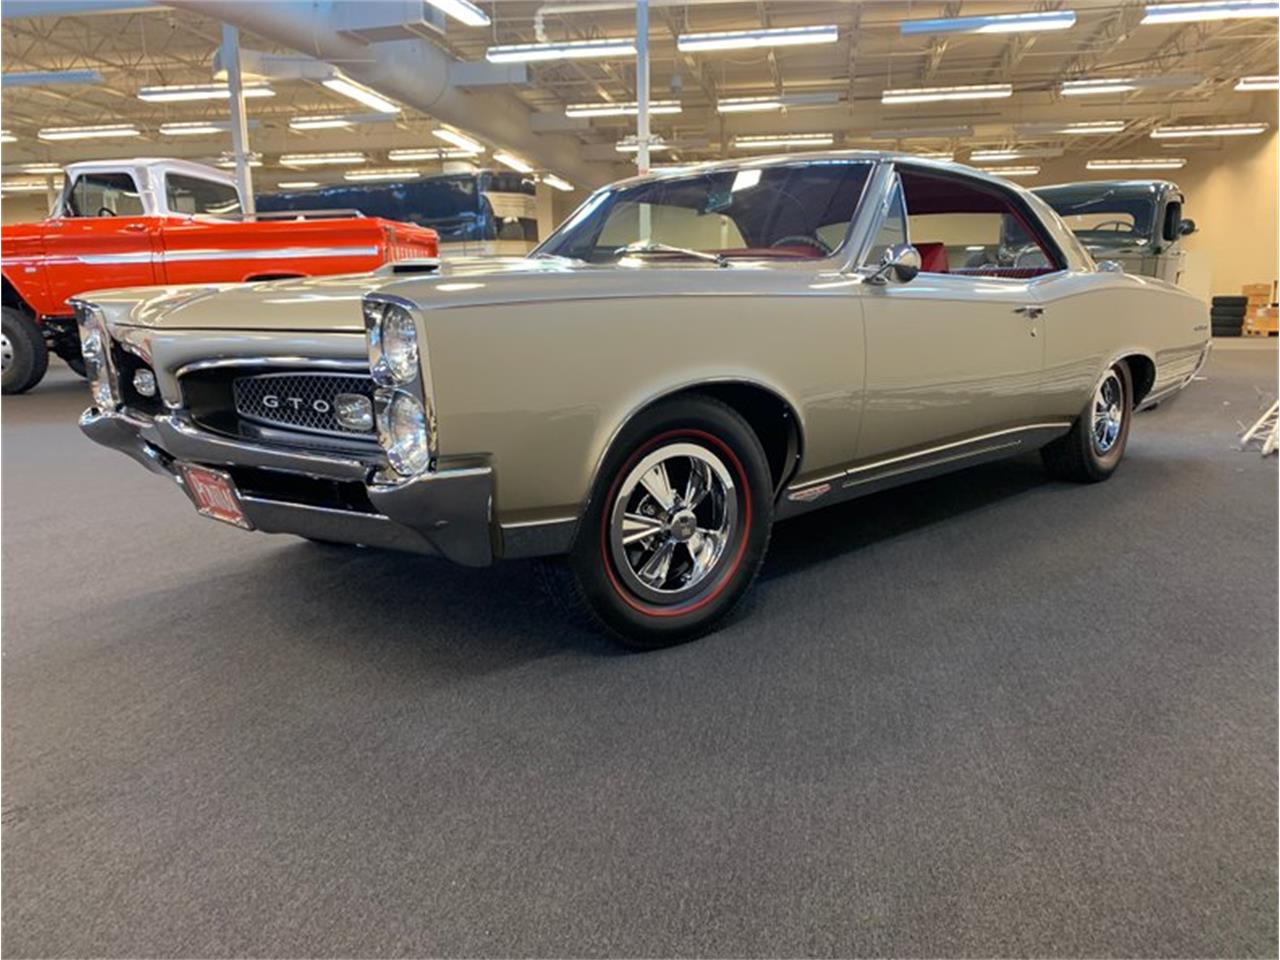 For Sale at Auction: 1967 Pontiac GTO in Punta Gorda, Florida for sale in Punta Gorda, FL